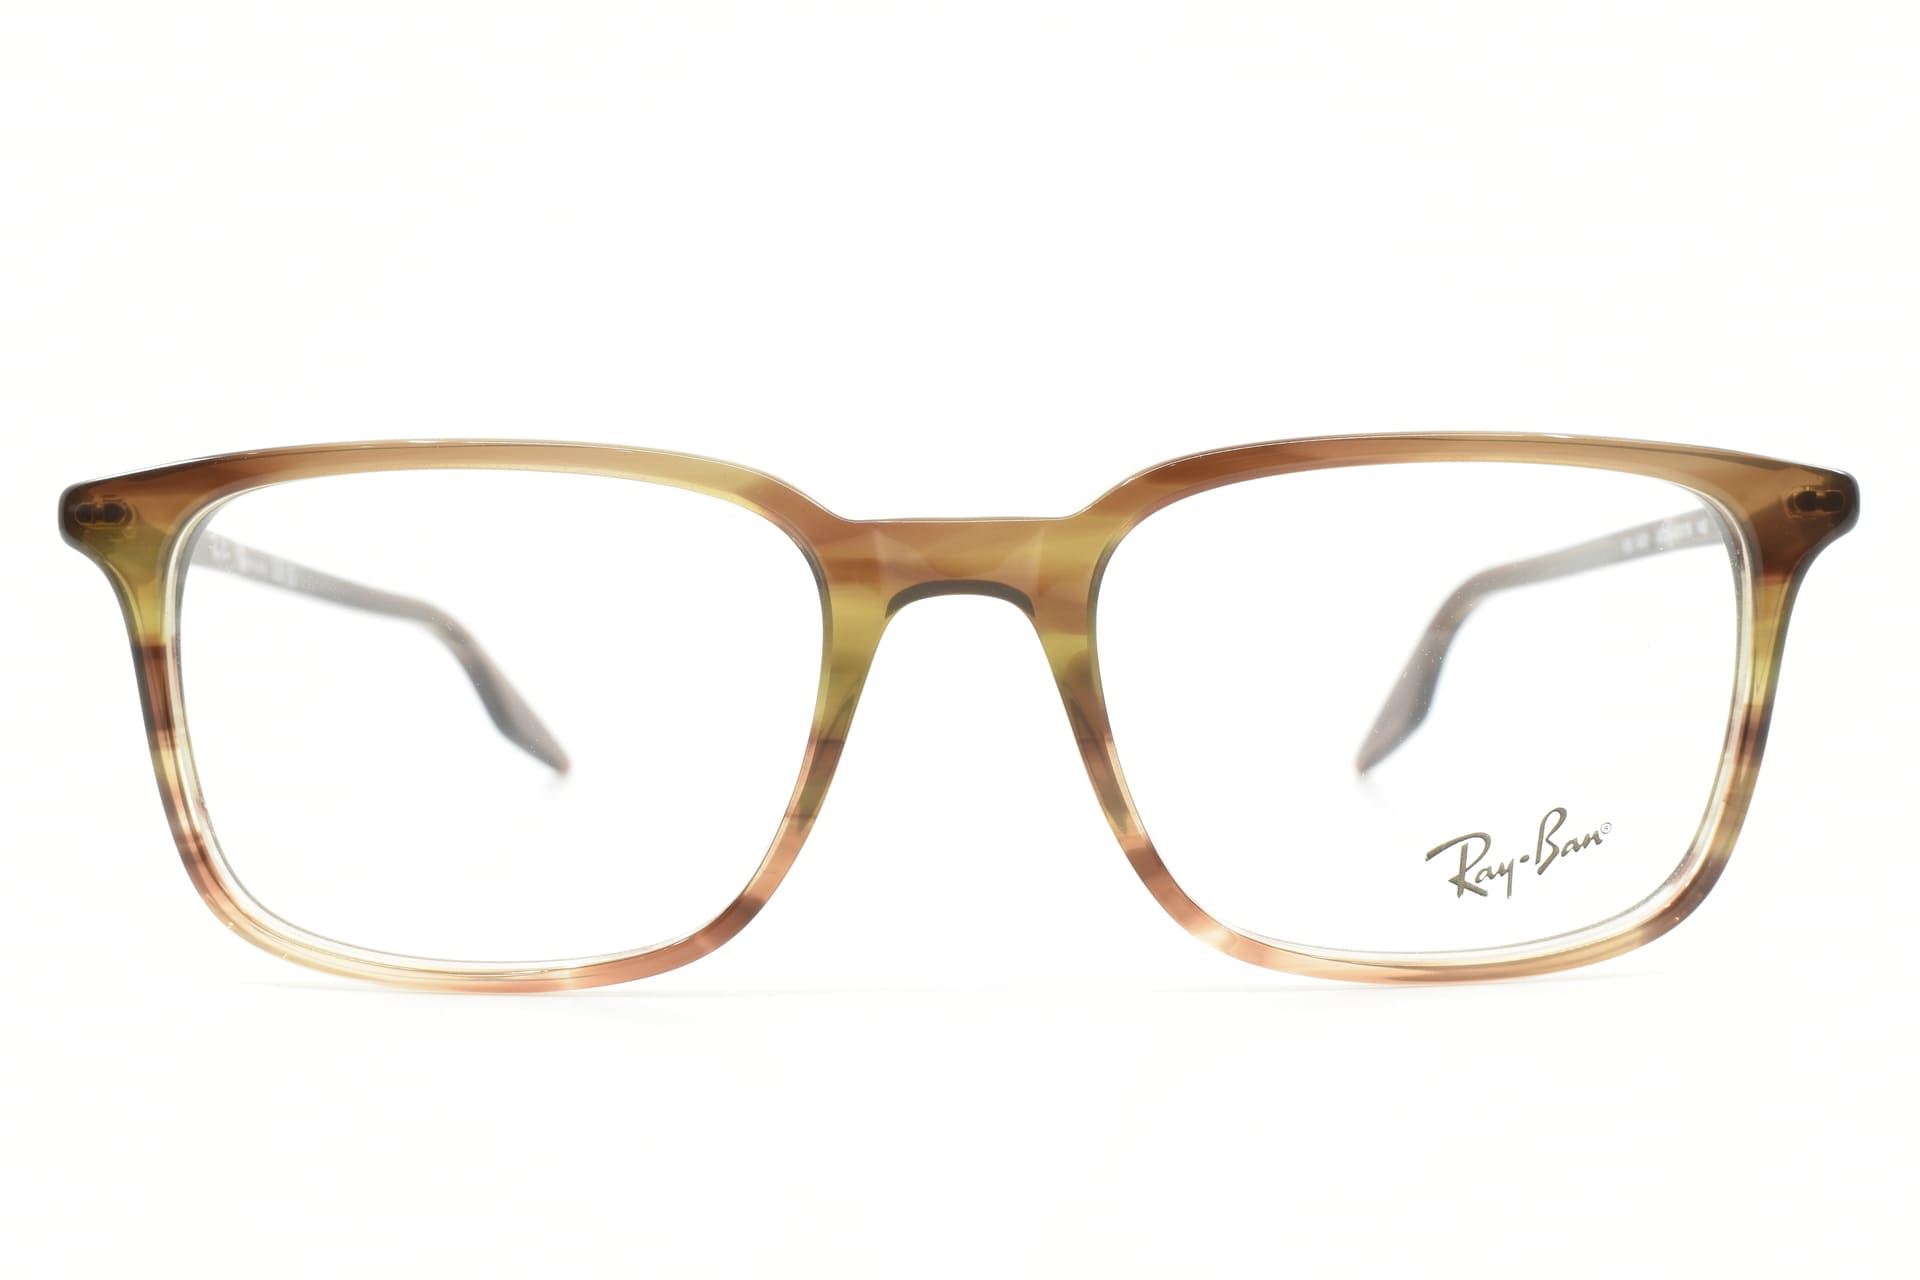 Ray ban rx - Brune / 53-19-145